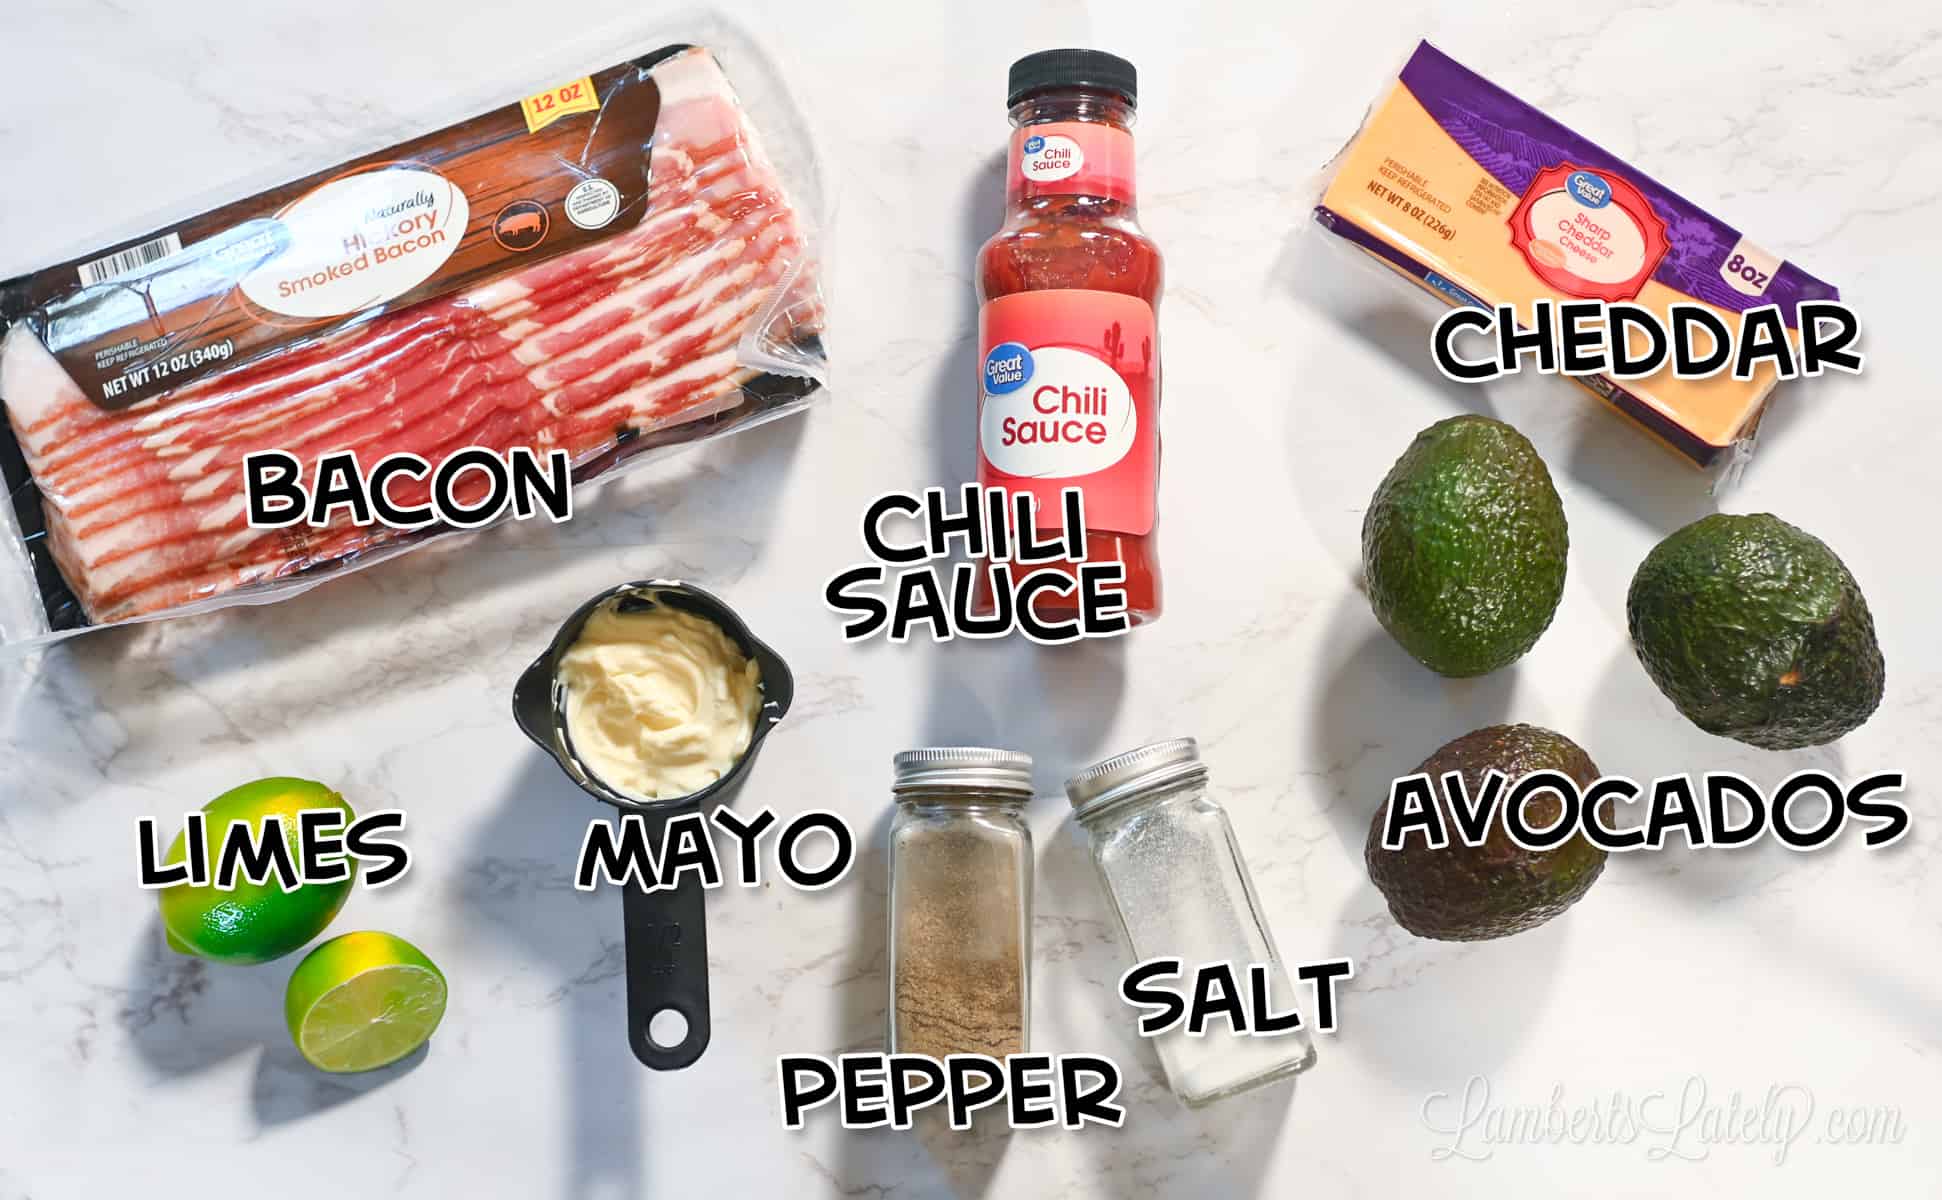 ingredients for baked avocados.